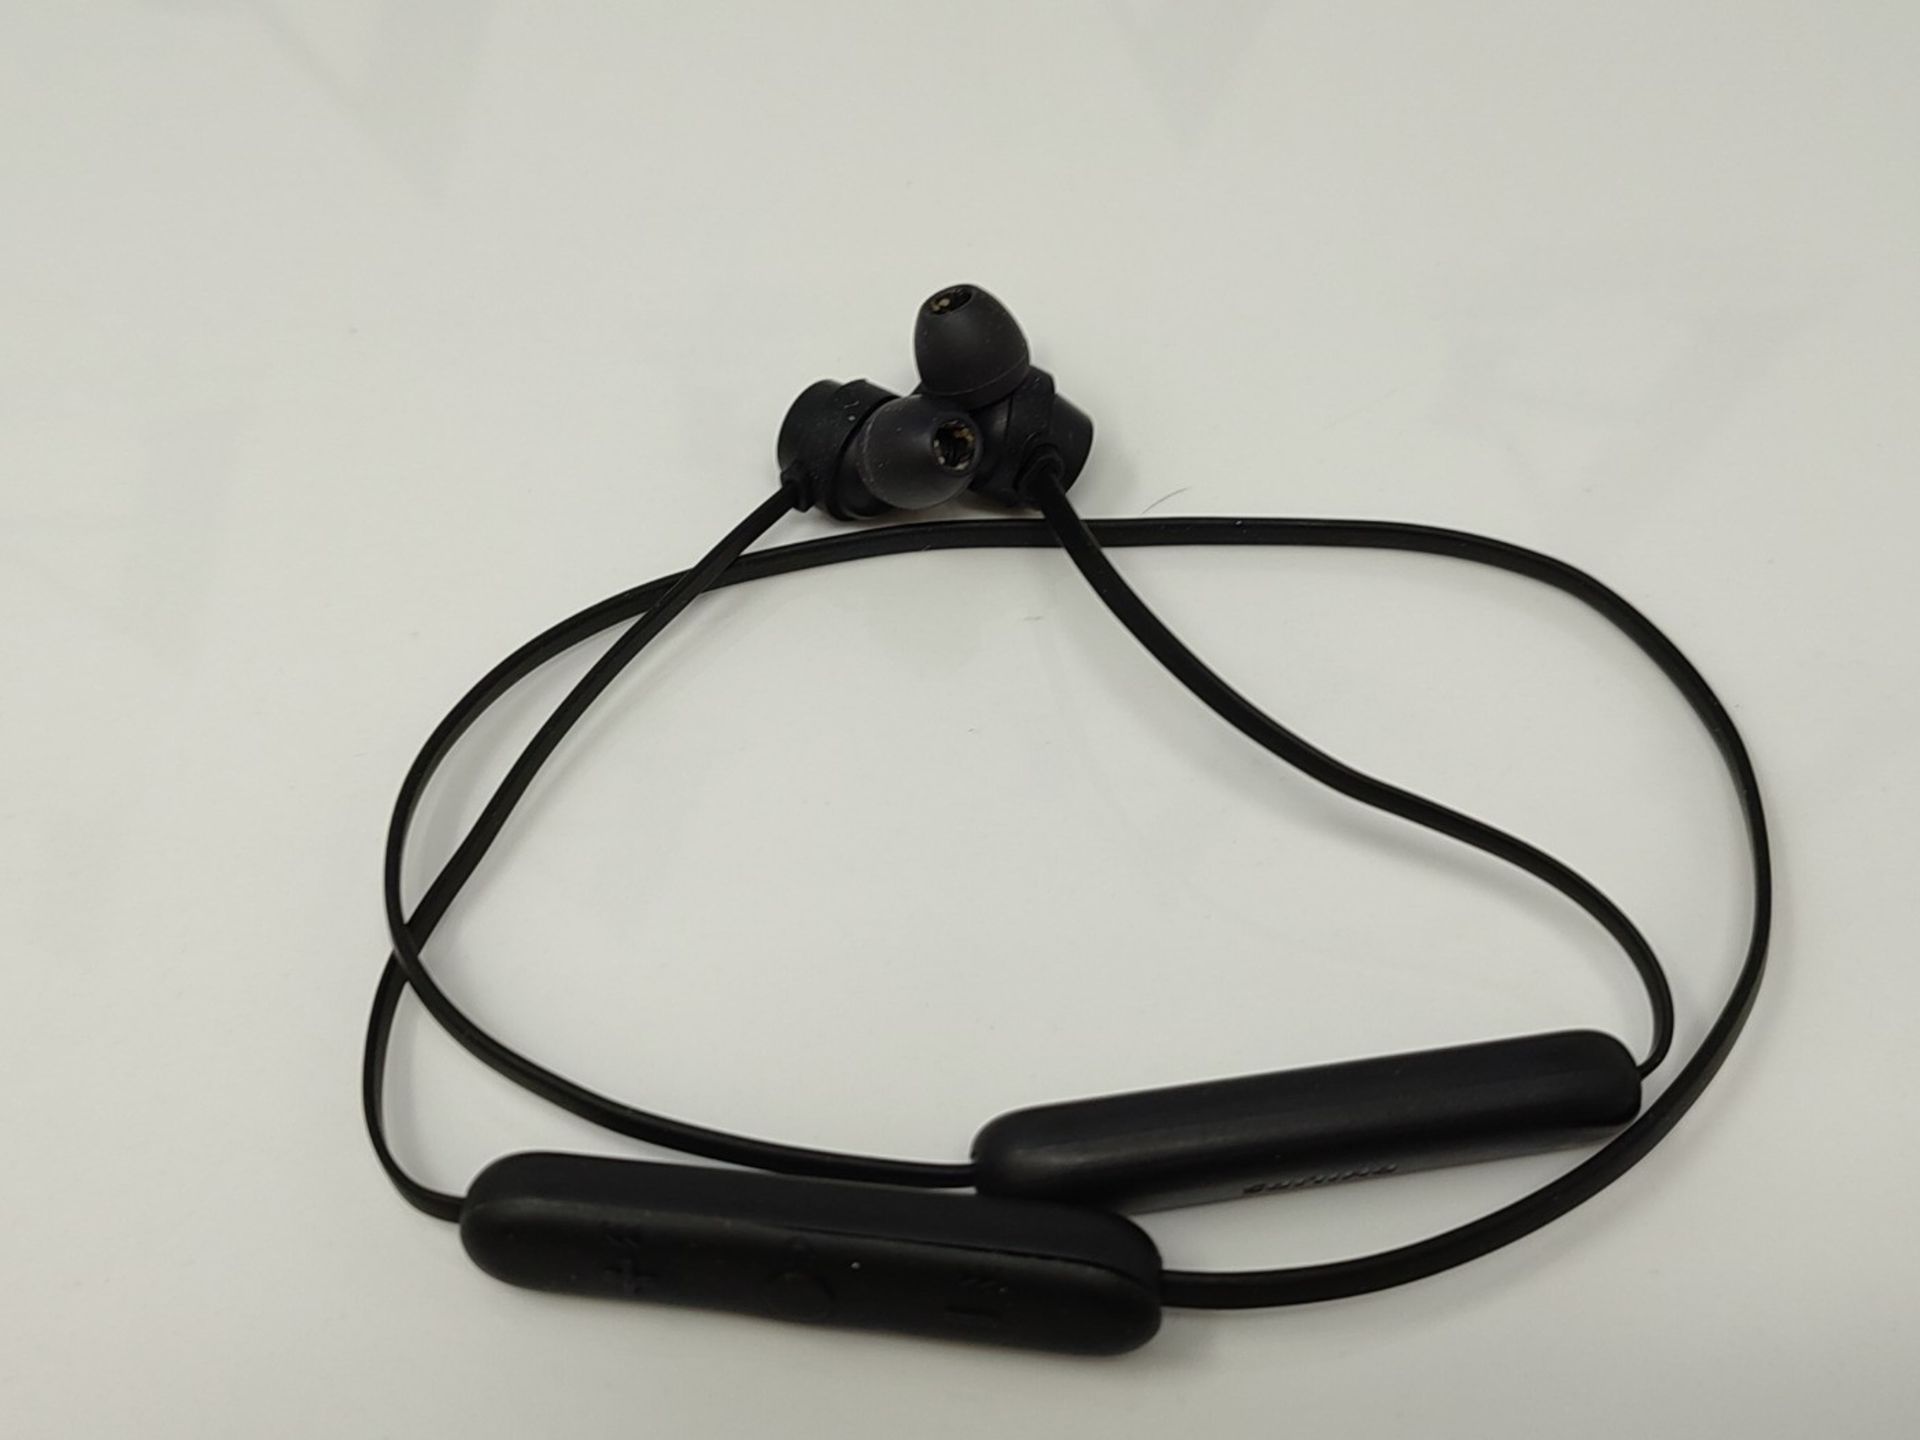 Philips Bluetooth in-ear headphones E1205BK/00 with microphone (inline remote control, - Image 2 of 2